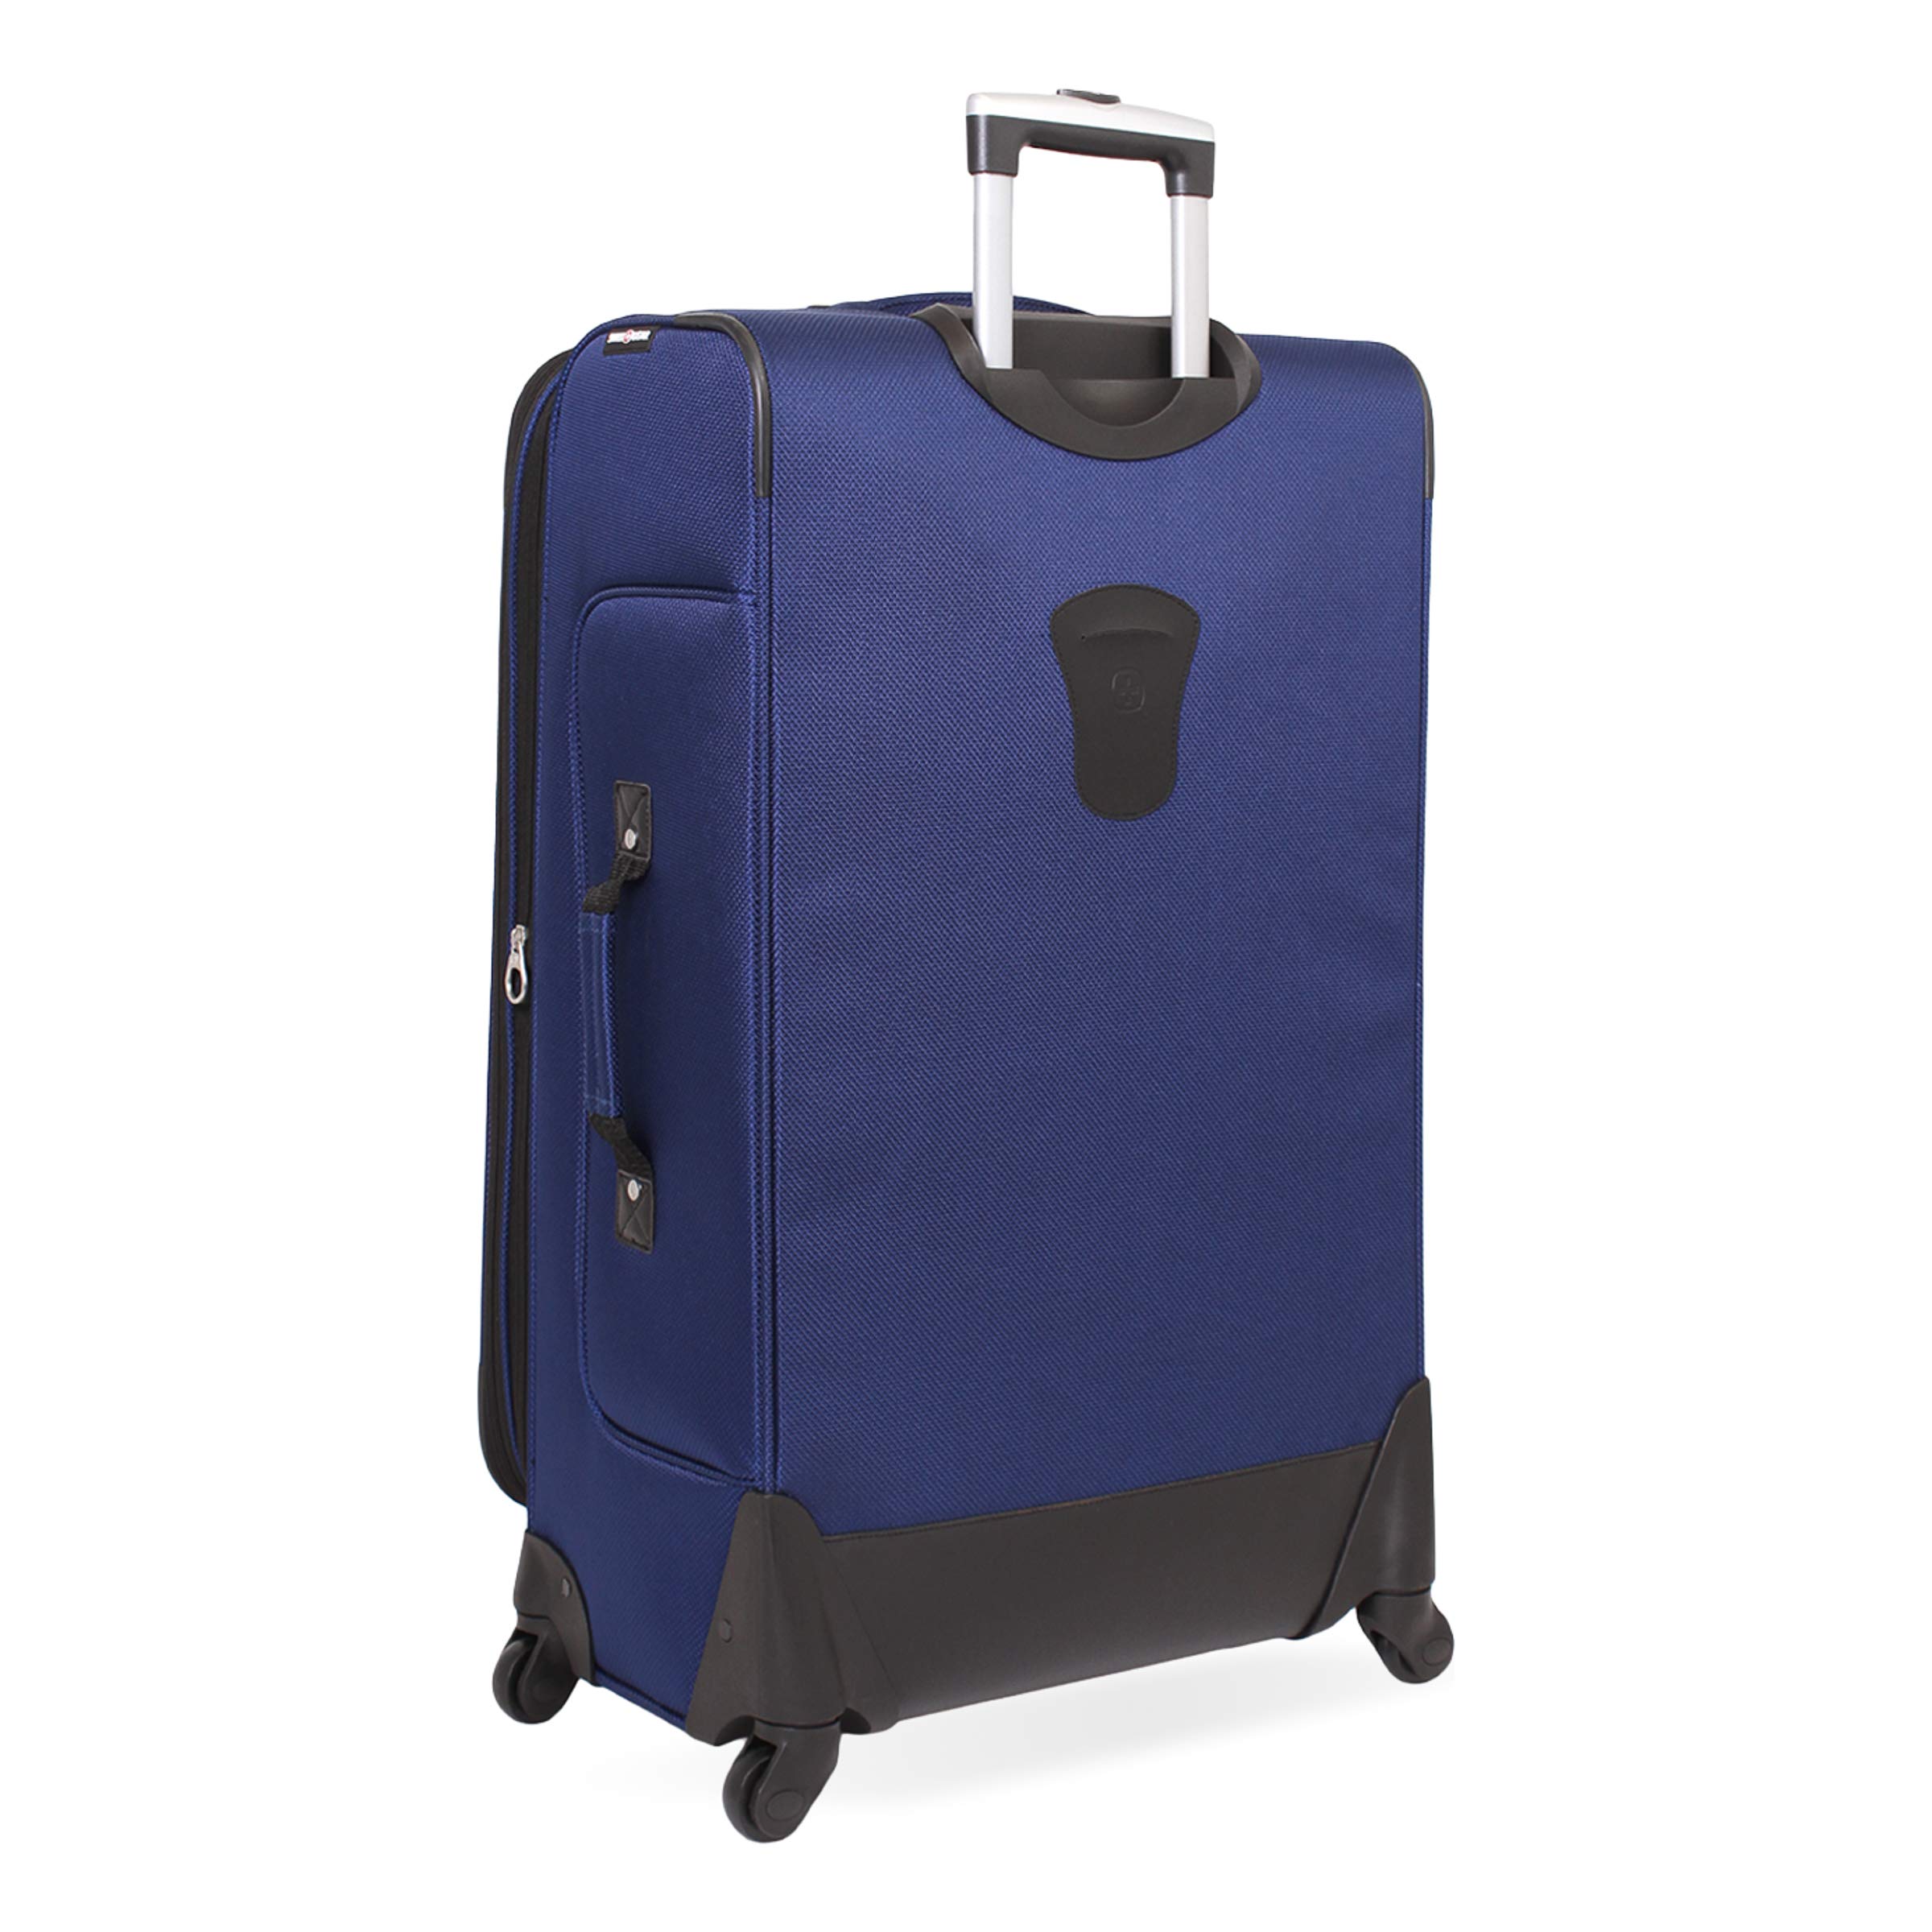 SwissGear Sion Softside Expandable Roller Luggage, Blue, Checked-Large 29-Inch